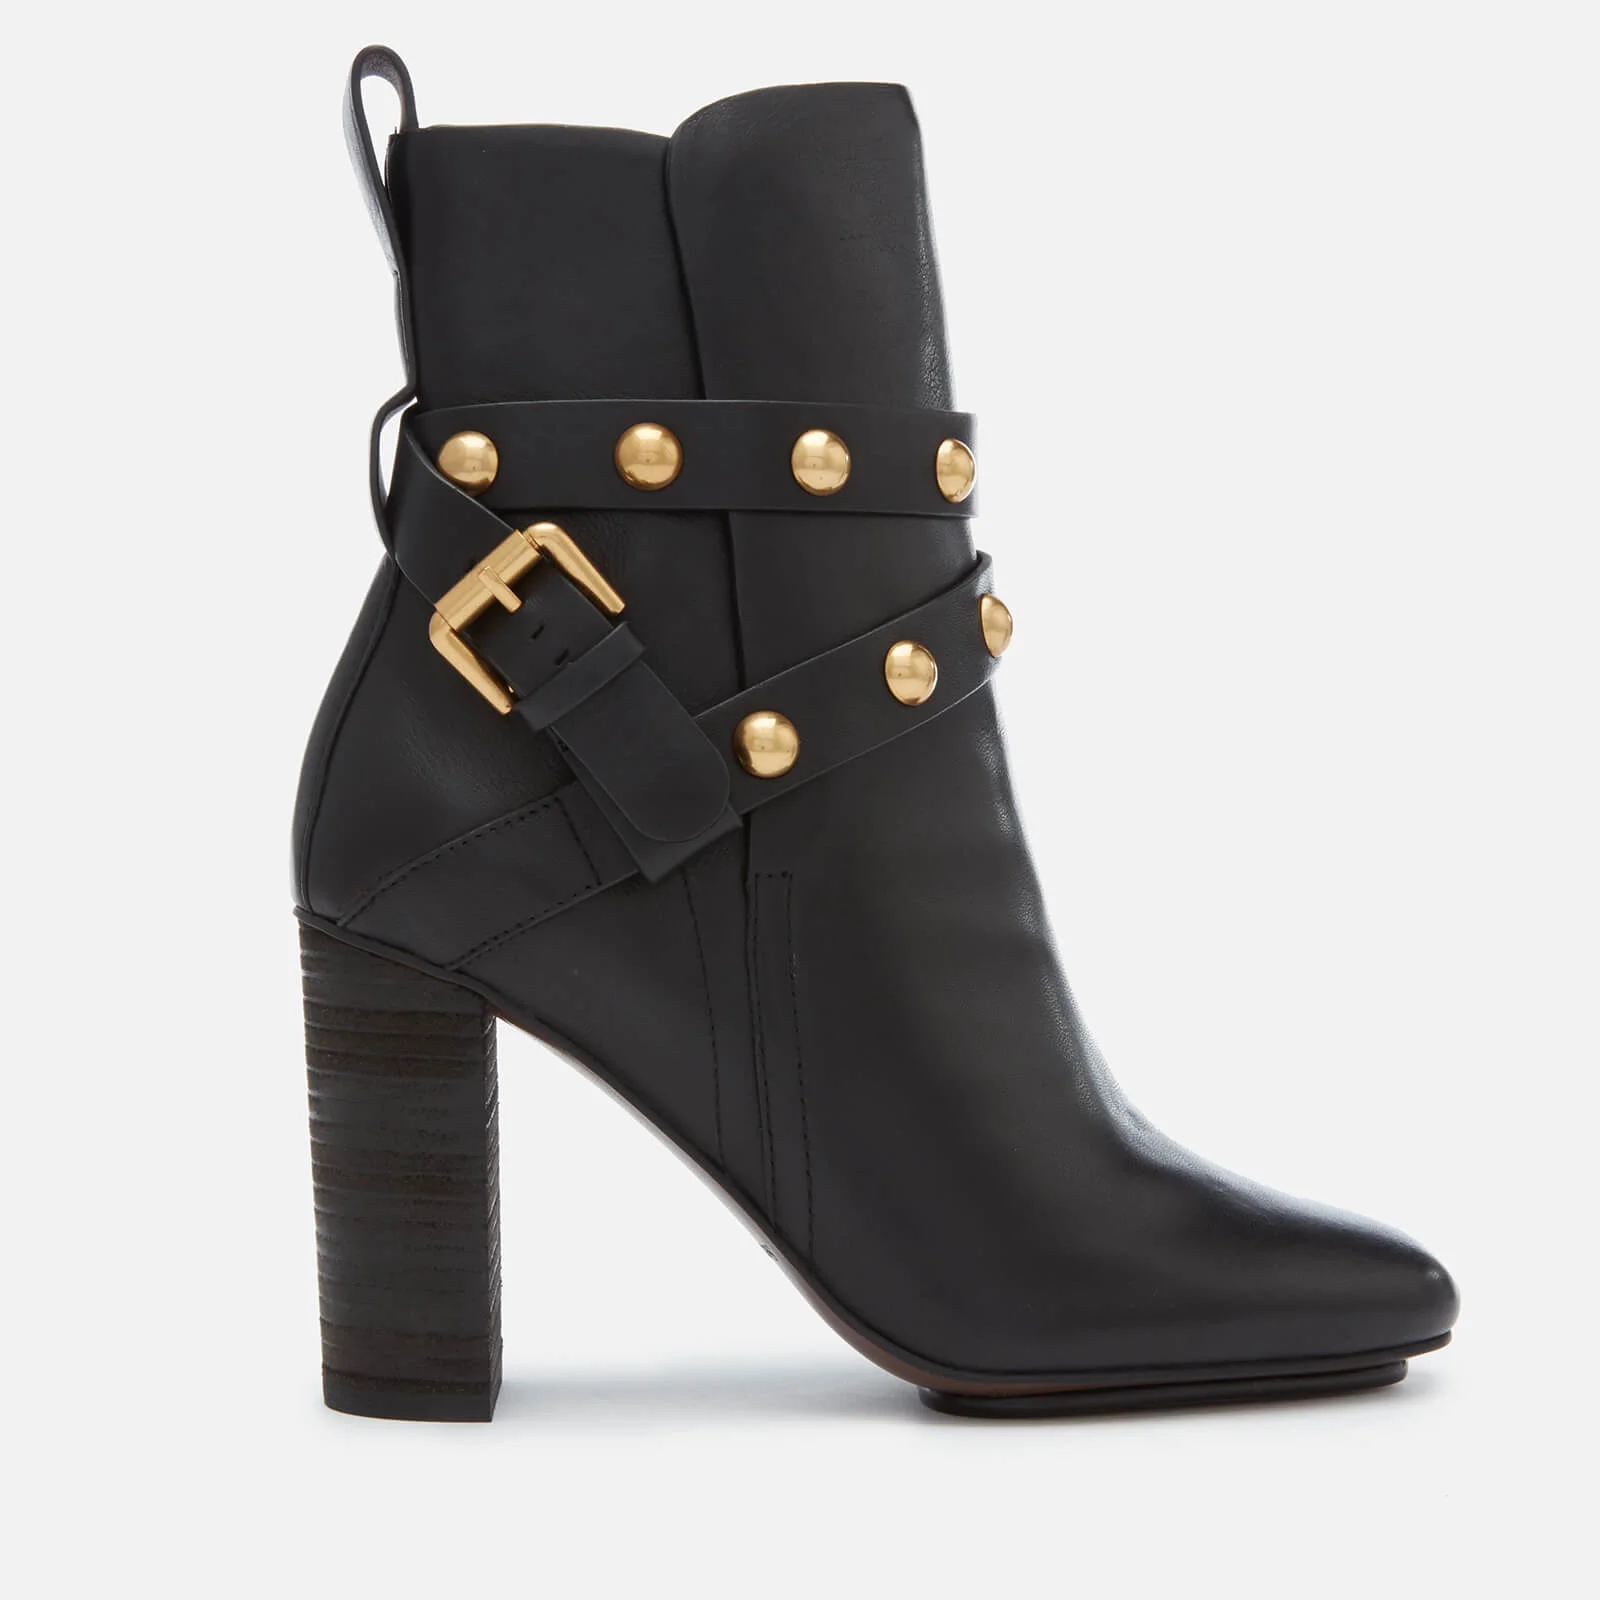 See By Chloé Women's Leather Heeled Boots - Nero Image 1